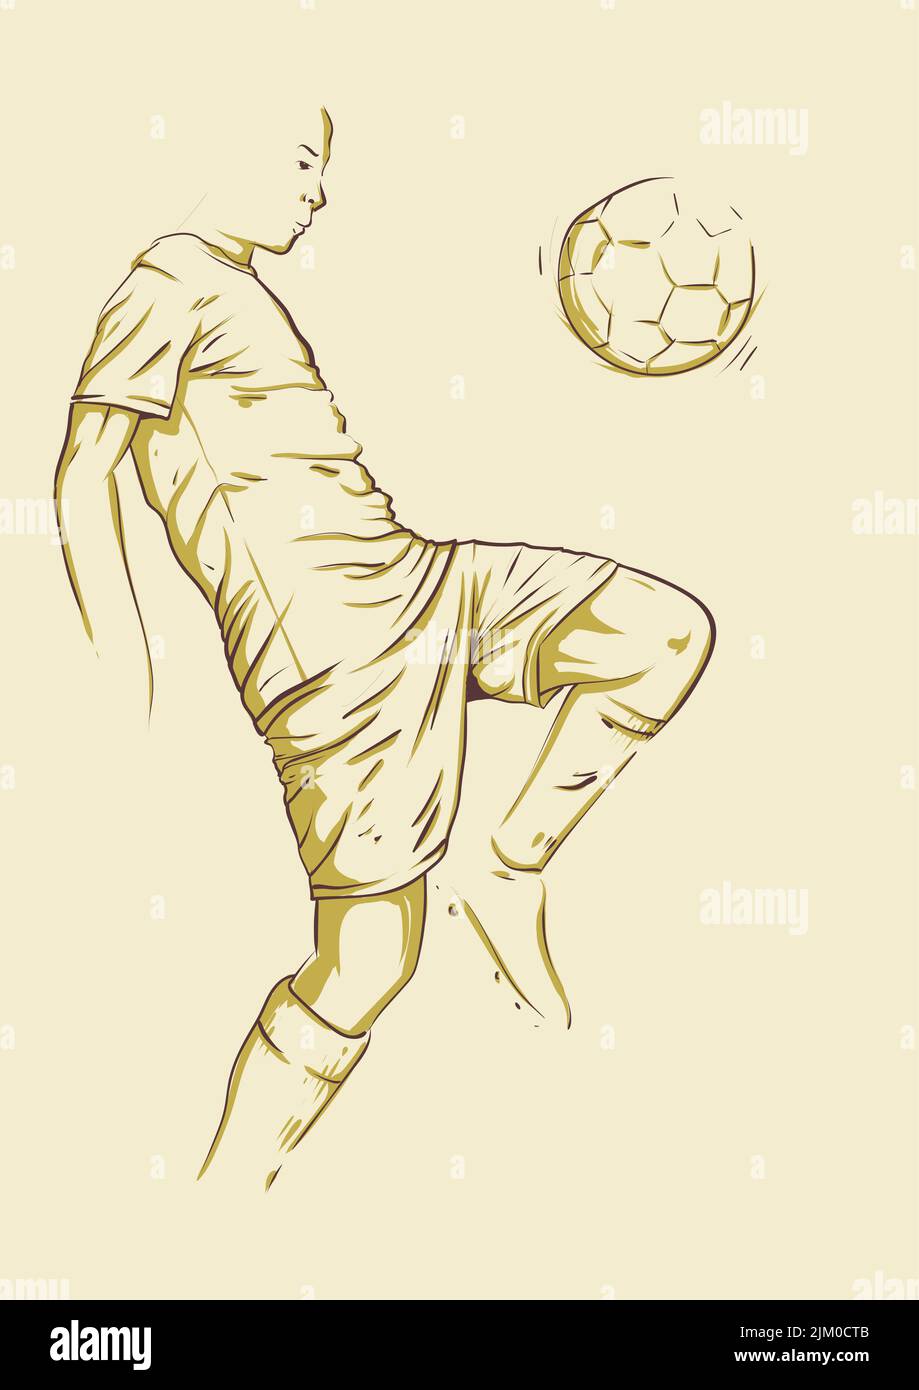 soccer player dribbling ball on the air. unfinished hand drawing sketch style vector illustration. for announcement poster, presentation and advertise Stock Vector